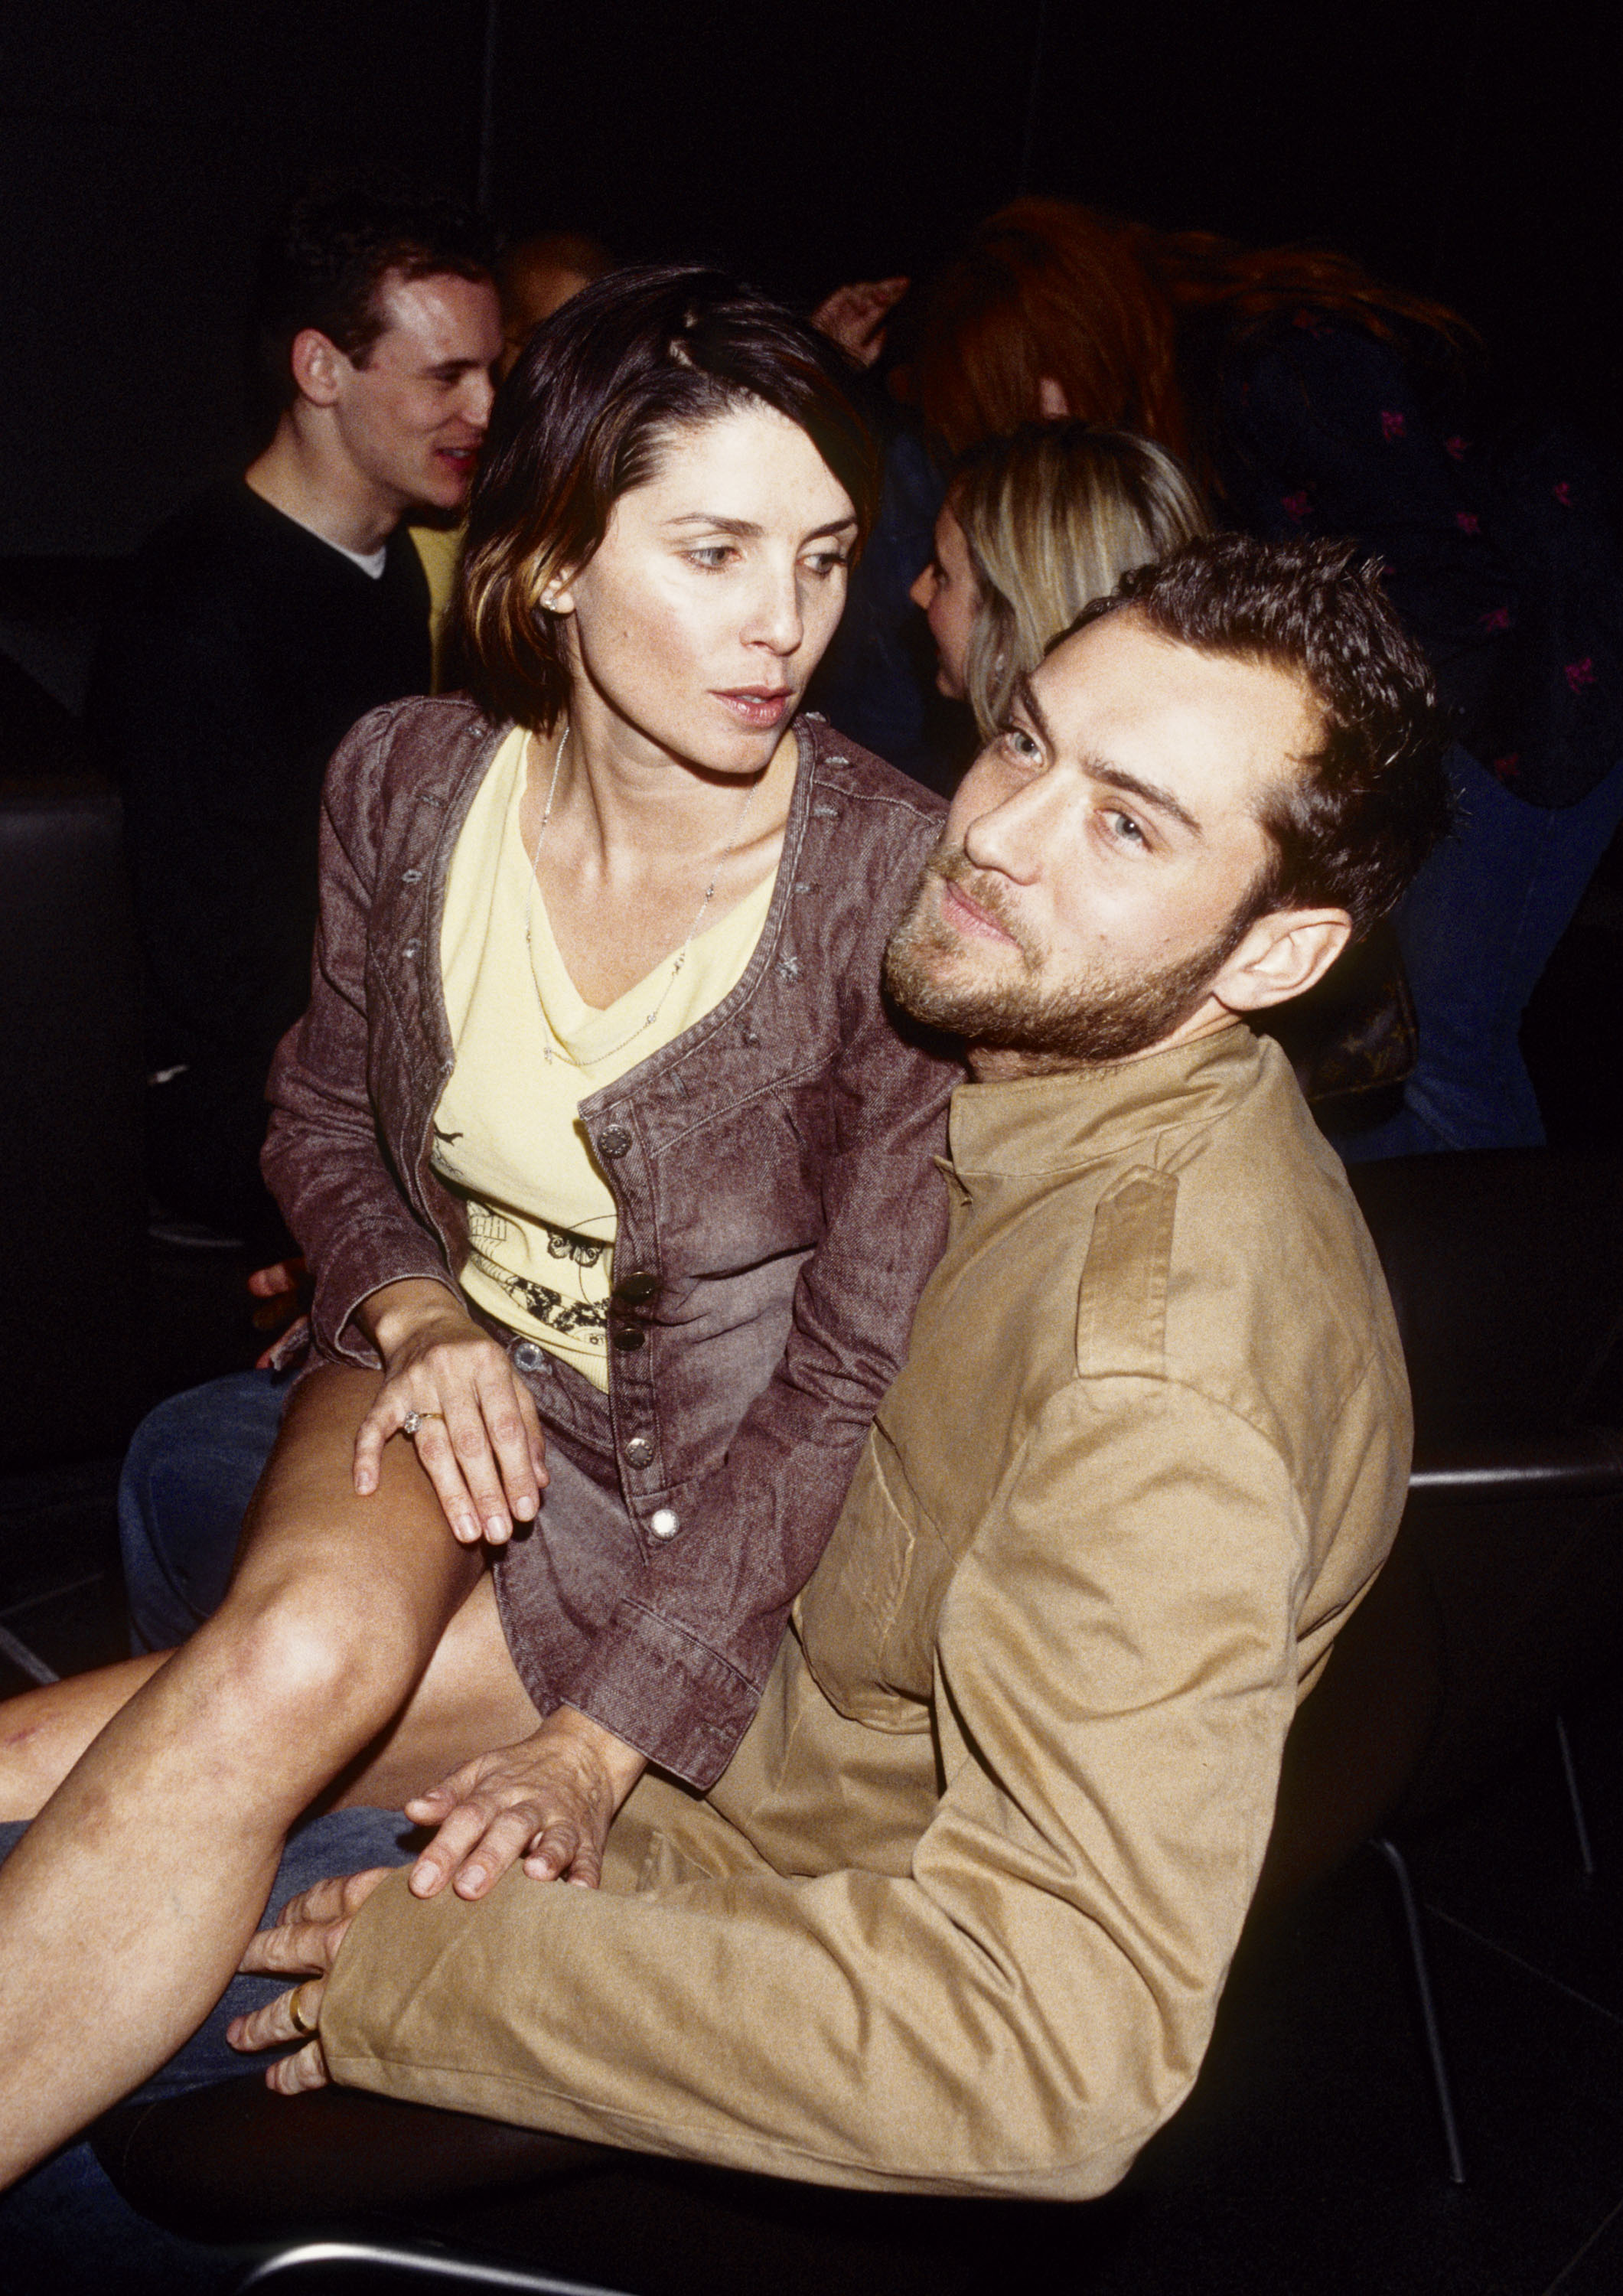 Sadie Frost and Jude law photographed in 2002 | Source: Getty Images